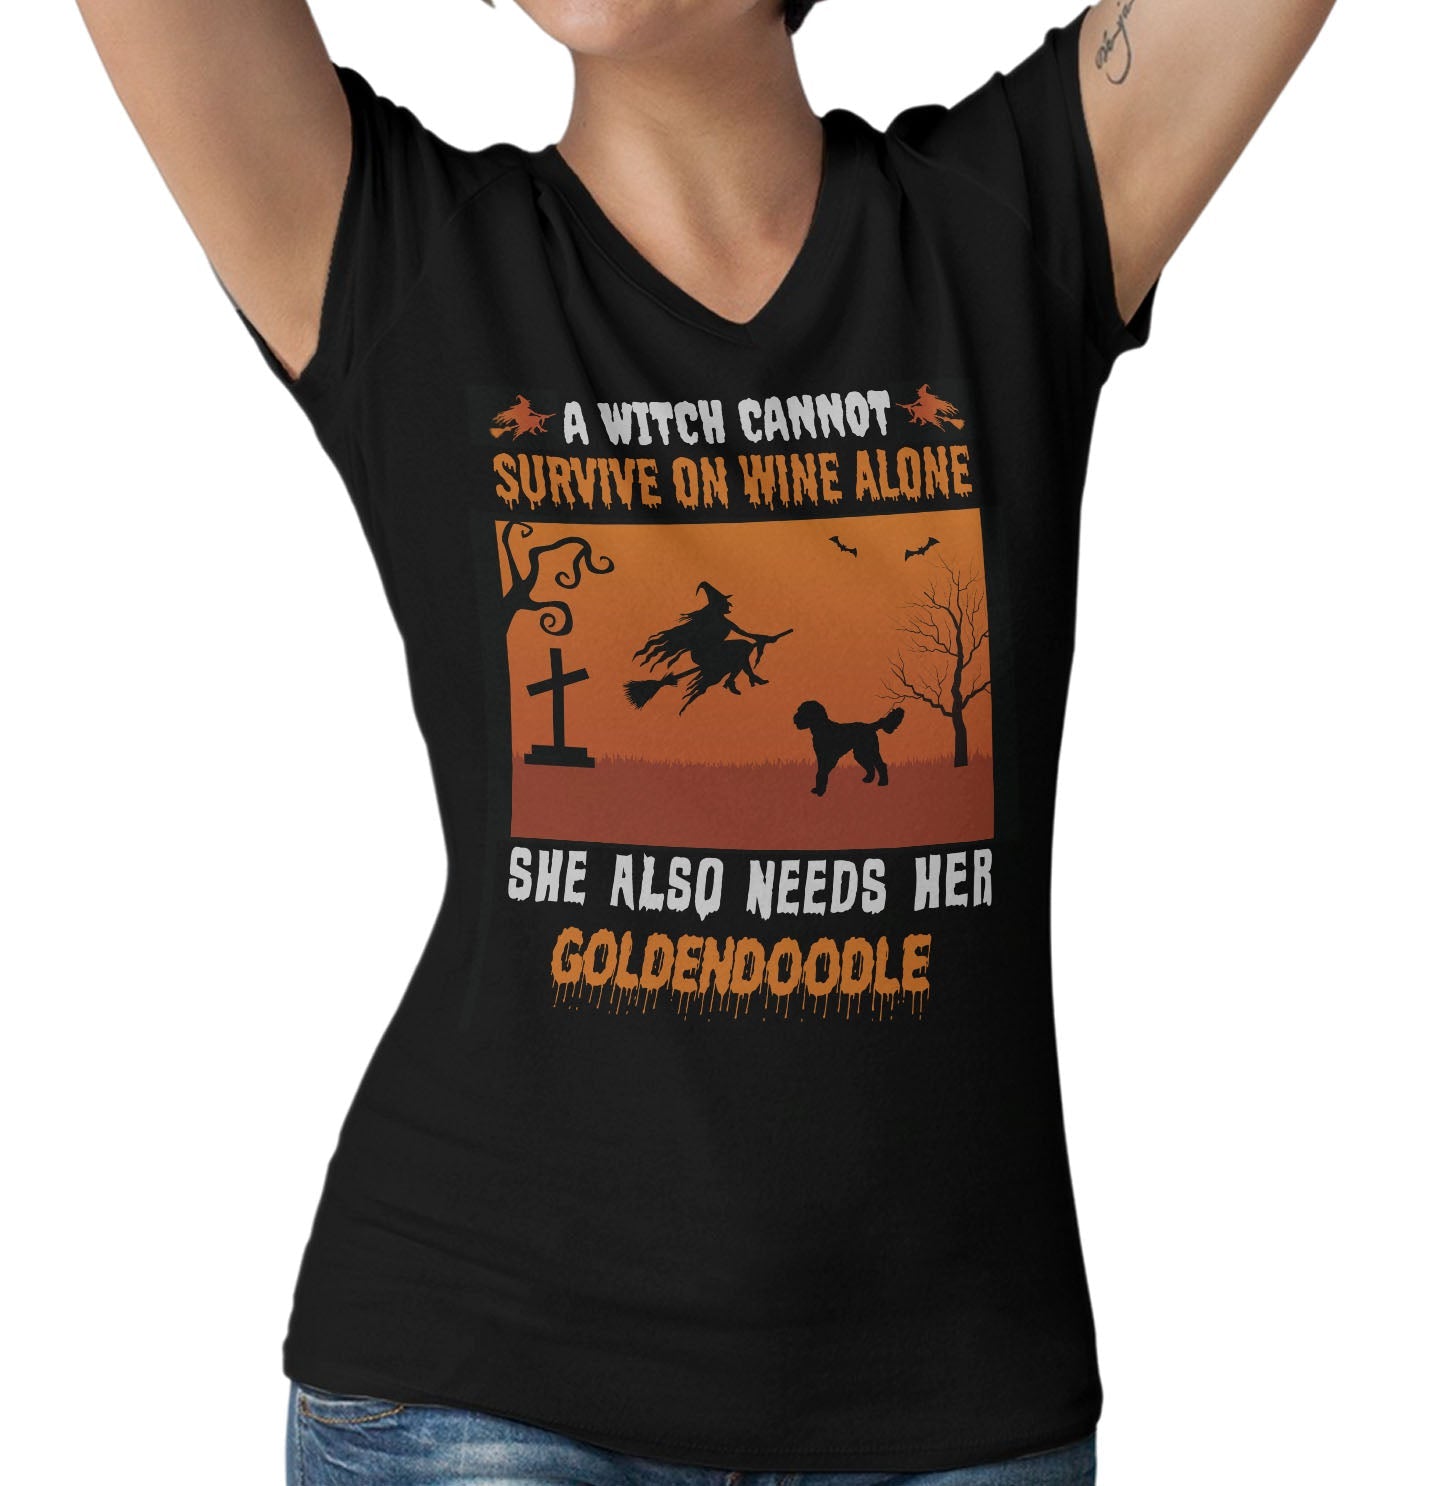 A Witch Needs Her Goldendoodle - Women's V-Neck T-Shirt